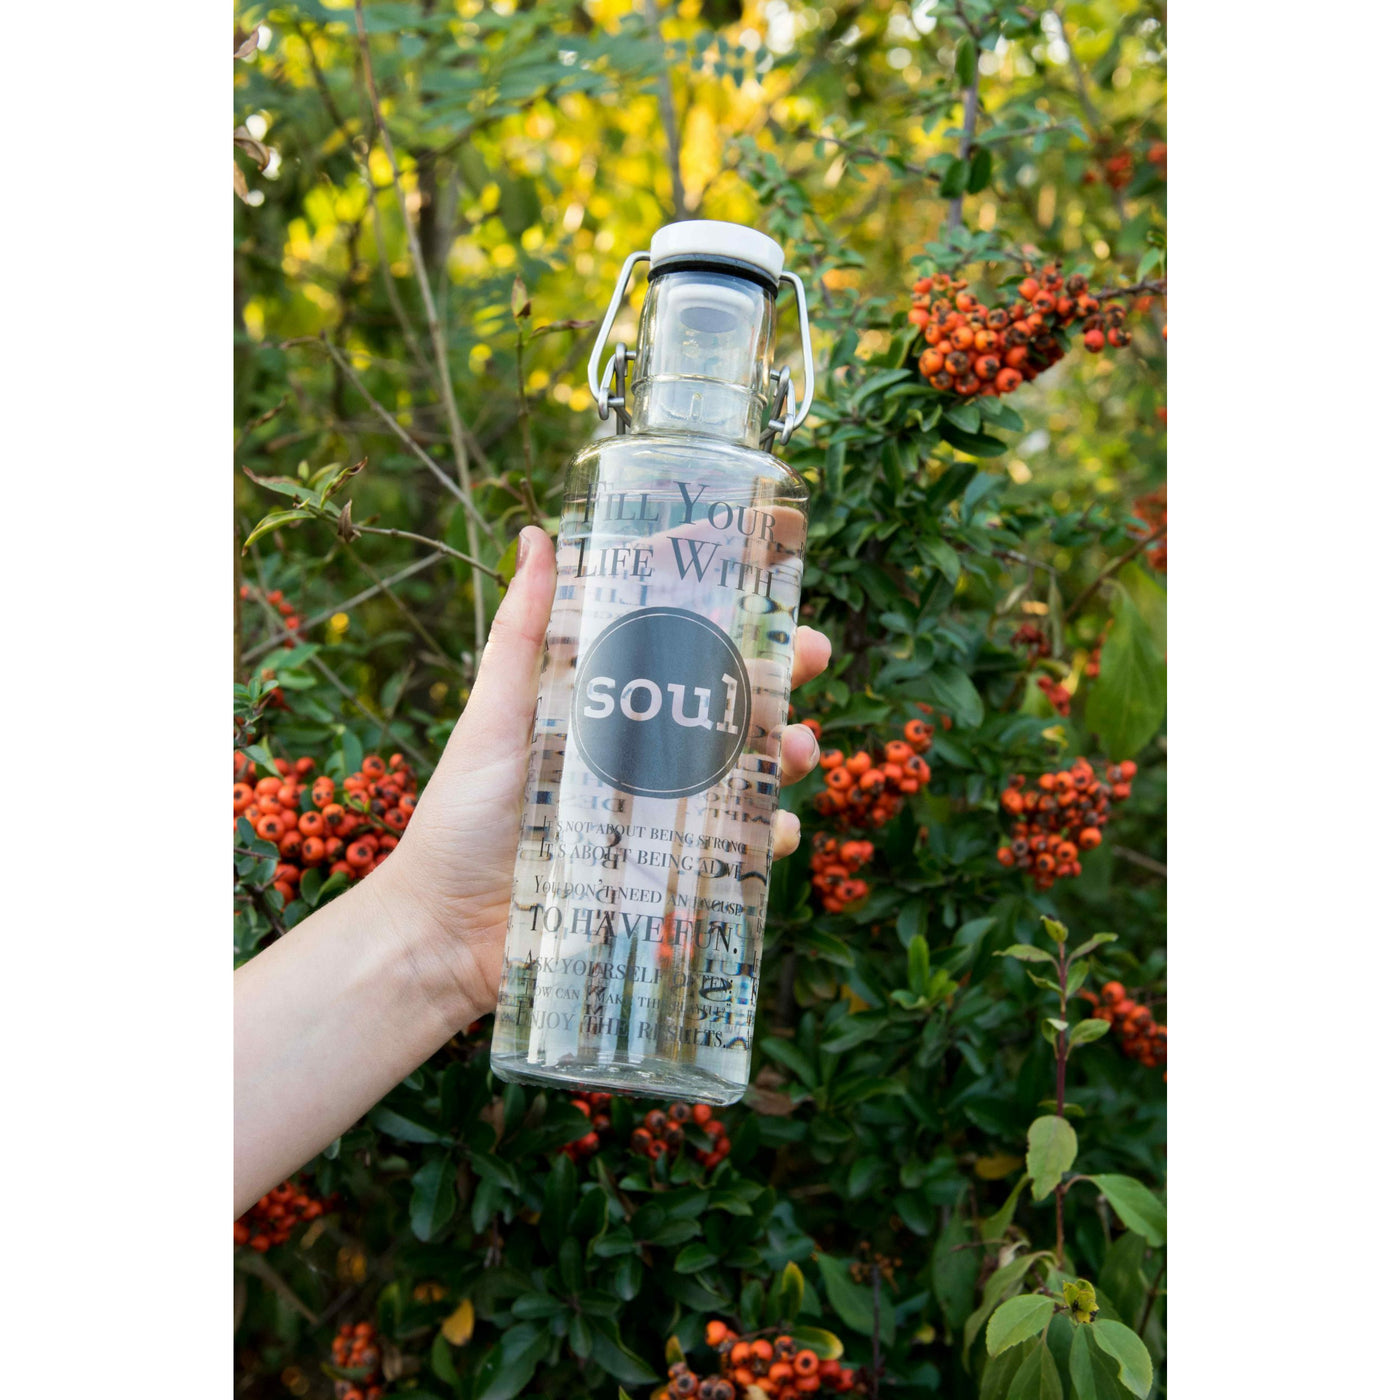 soulbottle 0,6l "Fill your Life with soul"